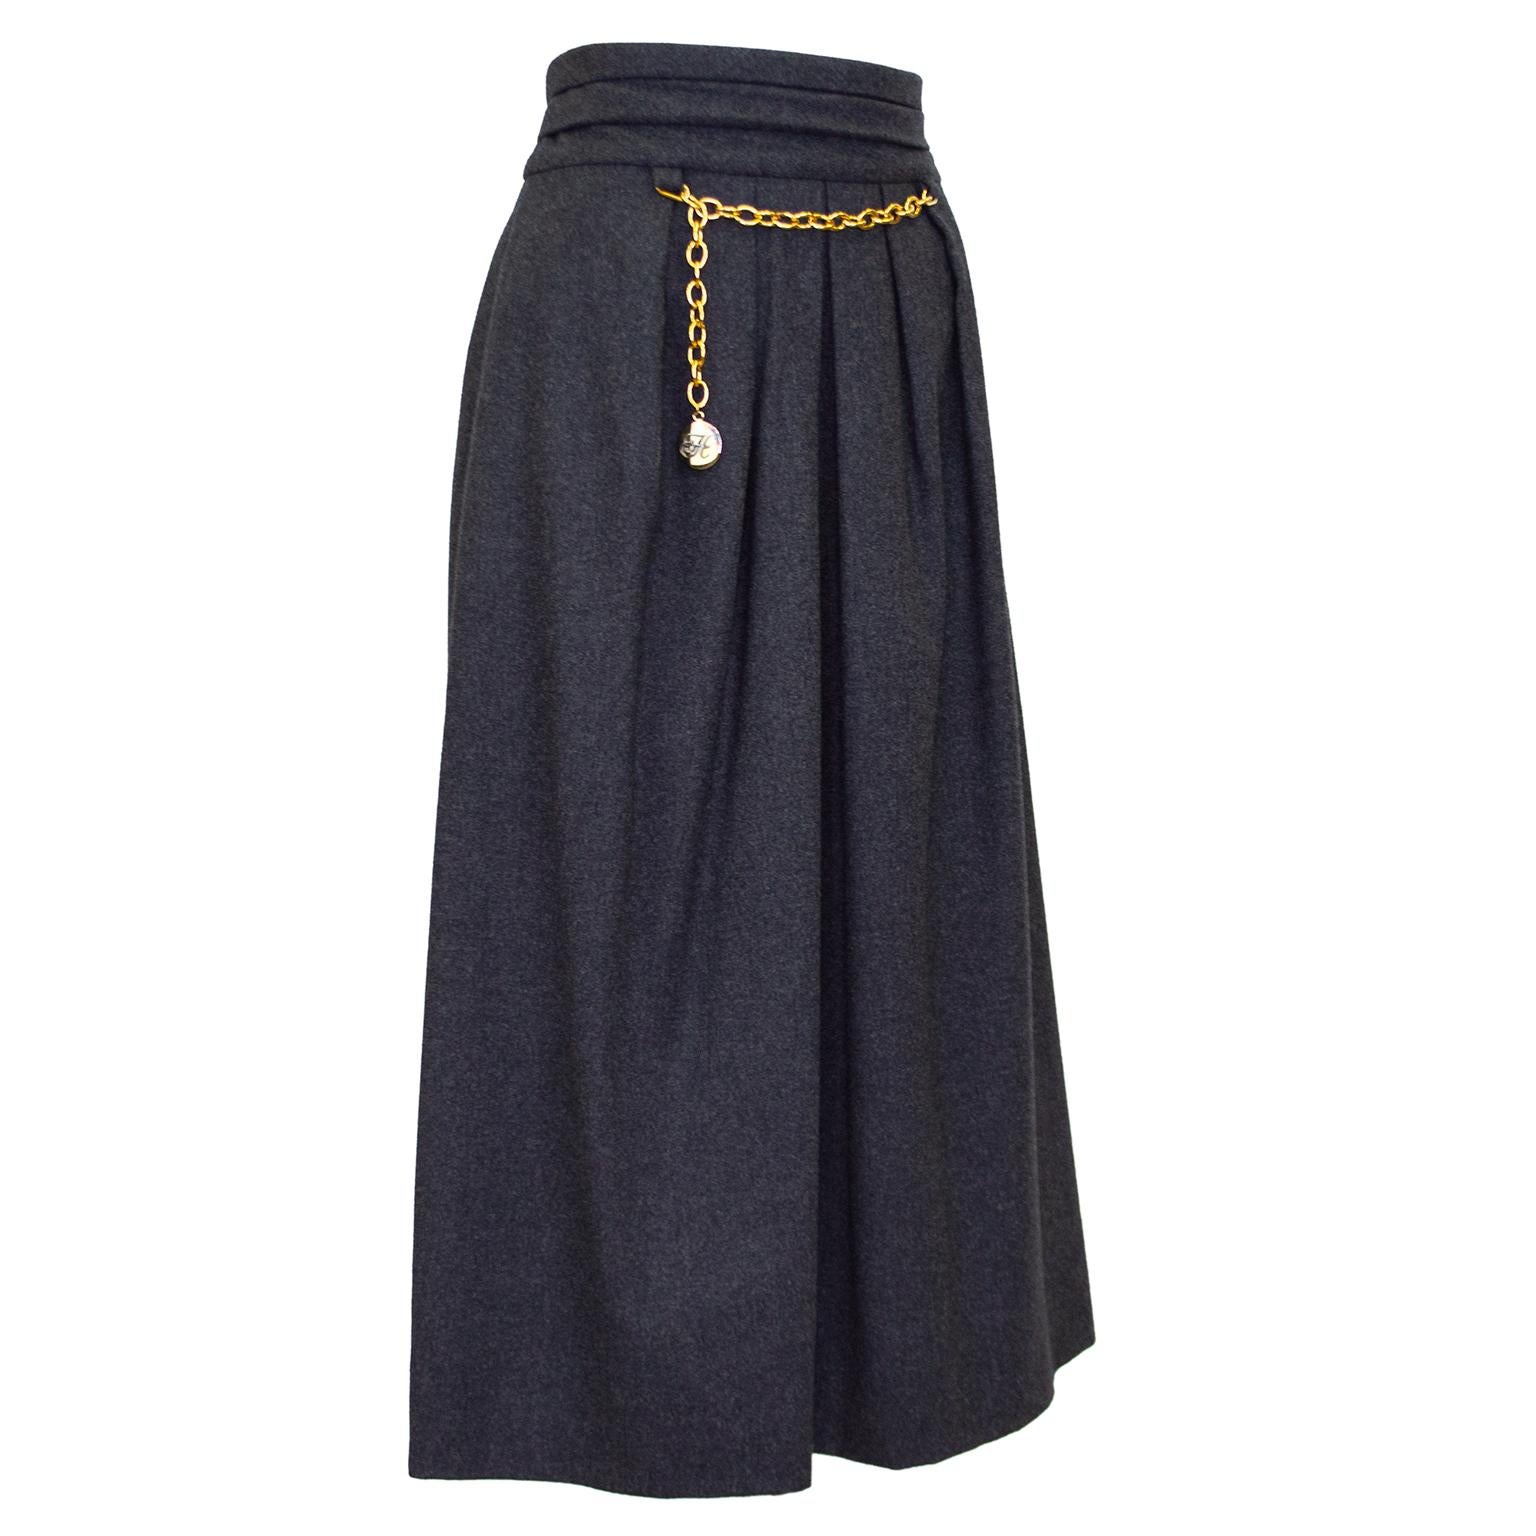 Beautiful Hermes dark grey skirt from the 1980s. High waisted with fold details, A-line shape with inverted pleats and midi length. 90% wool, 10% cashmere. Gold tone chain detail across front waist with round Hermes H hanging charm. Side zipper with